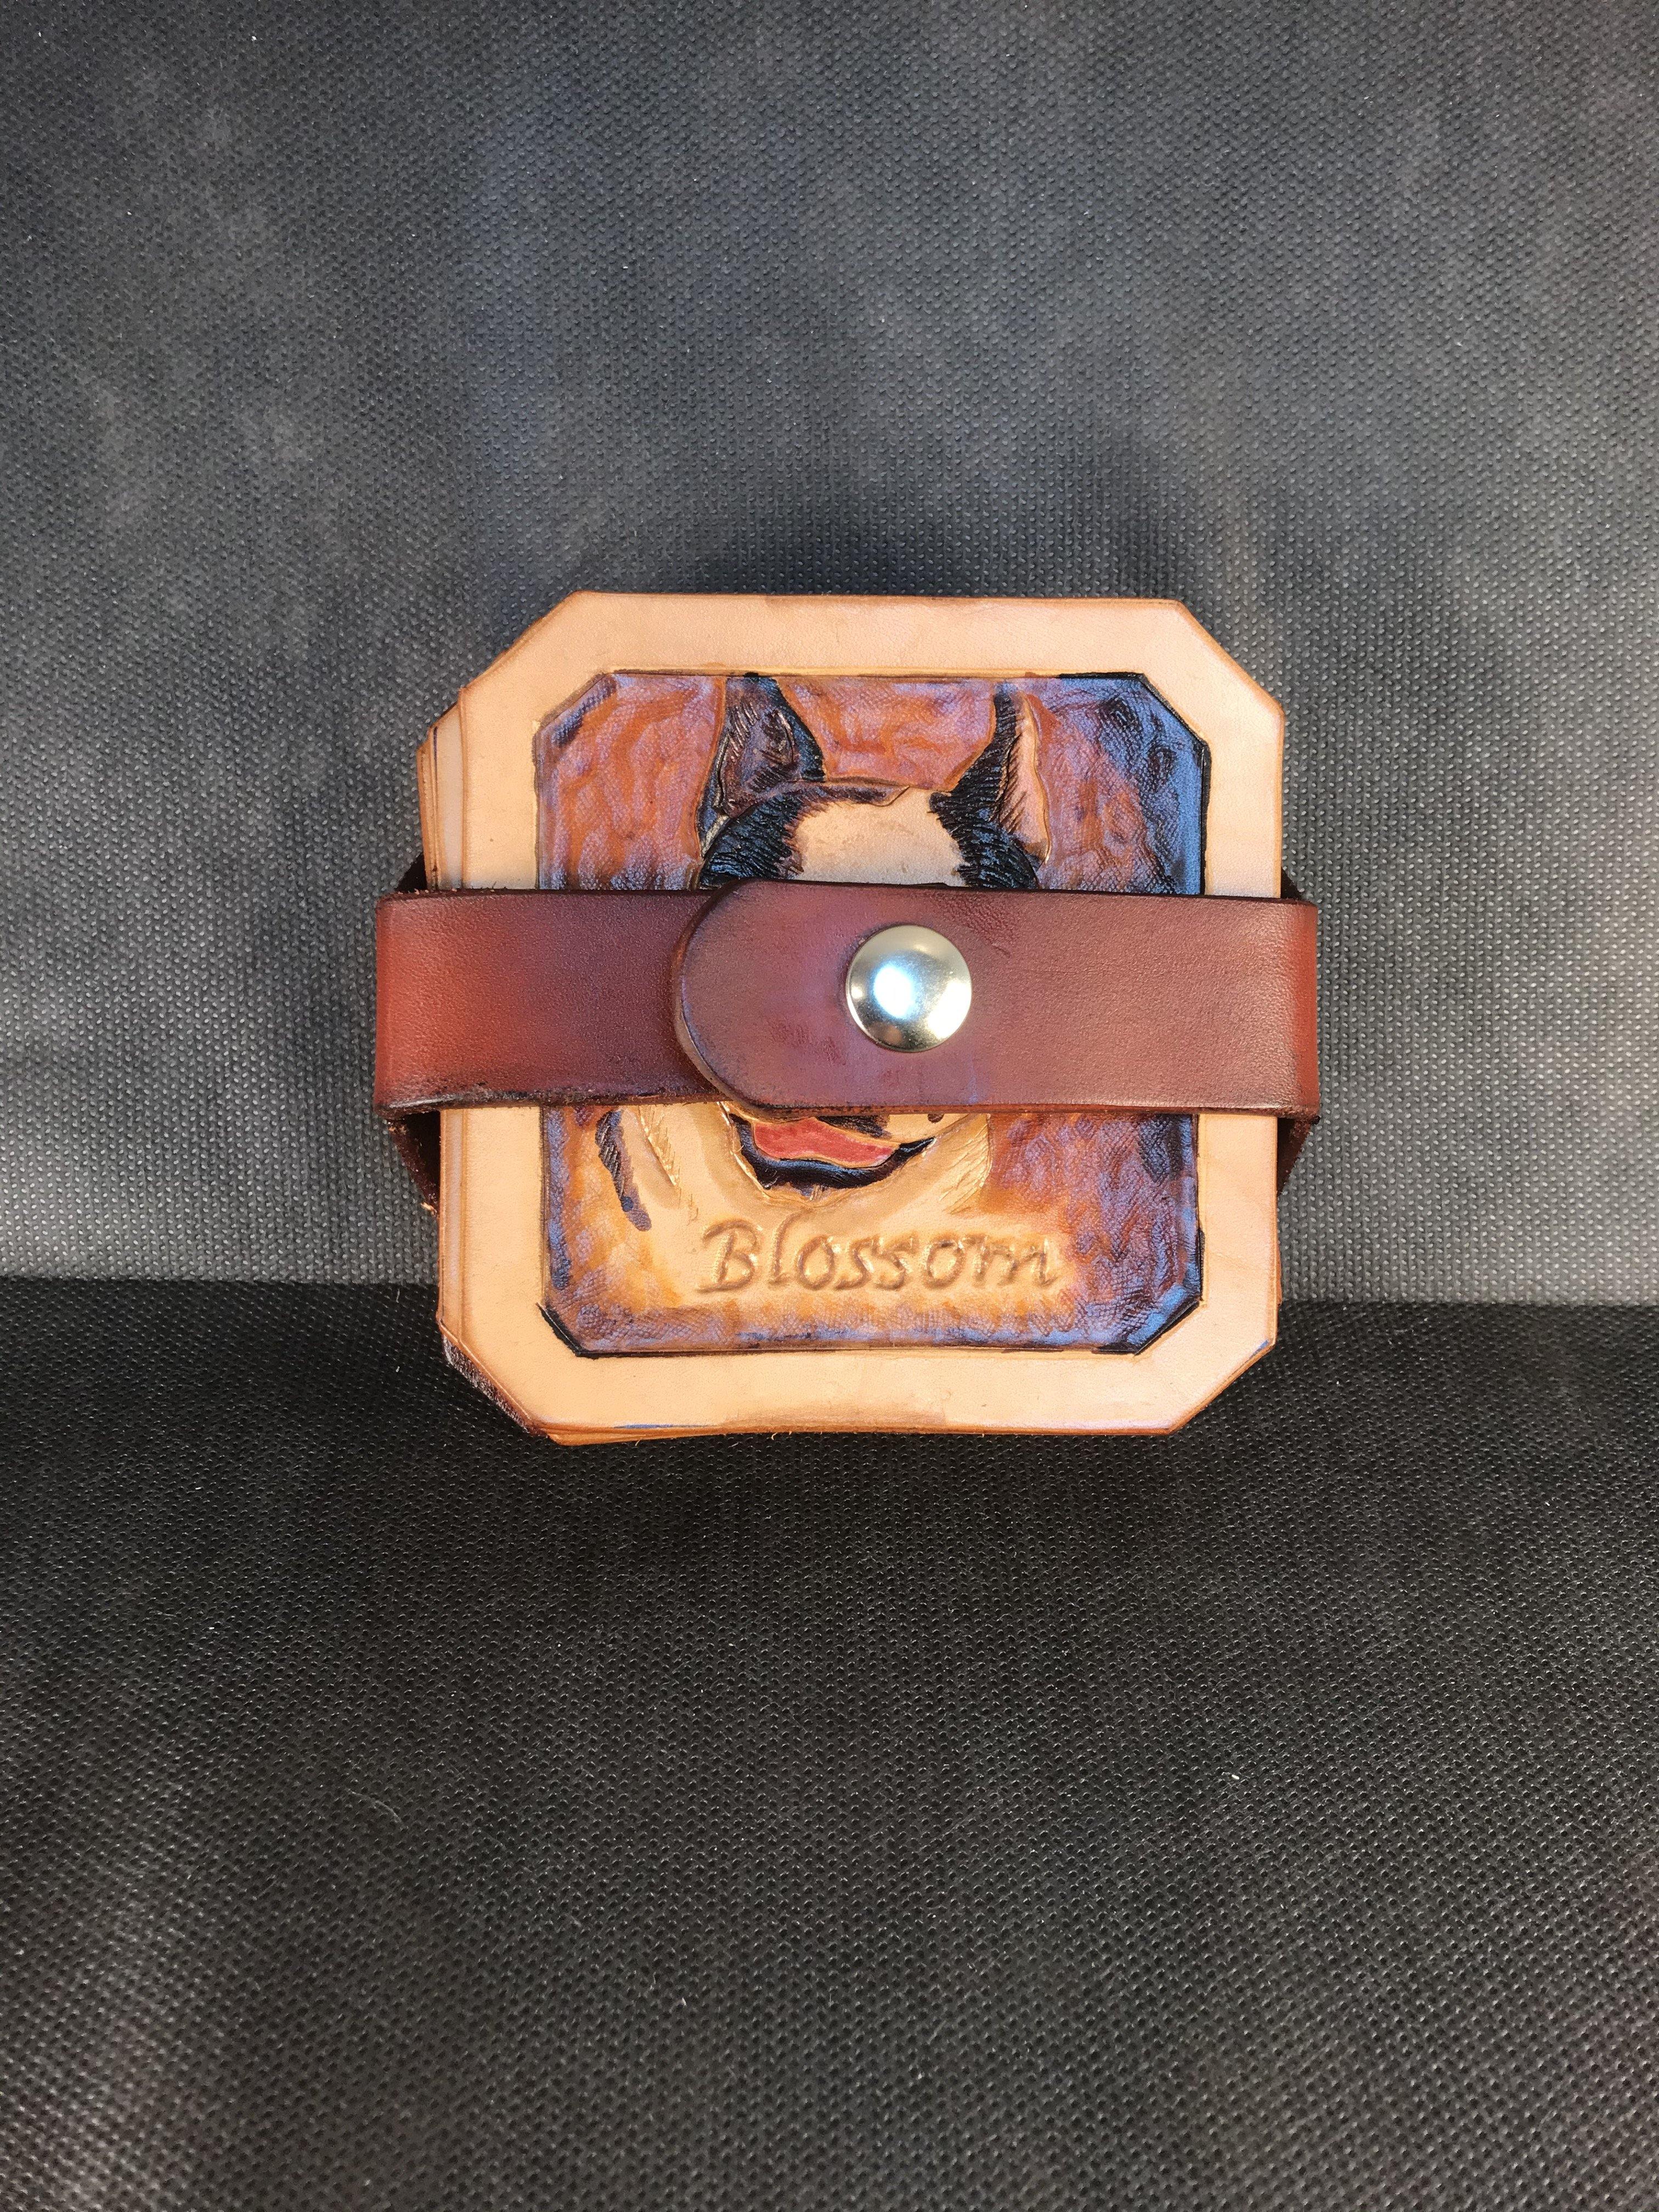 Customized Leather Drink Coasters - Black Swamp Leather Company